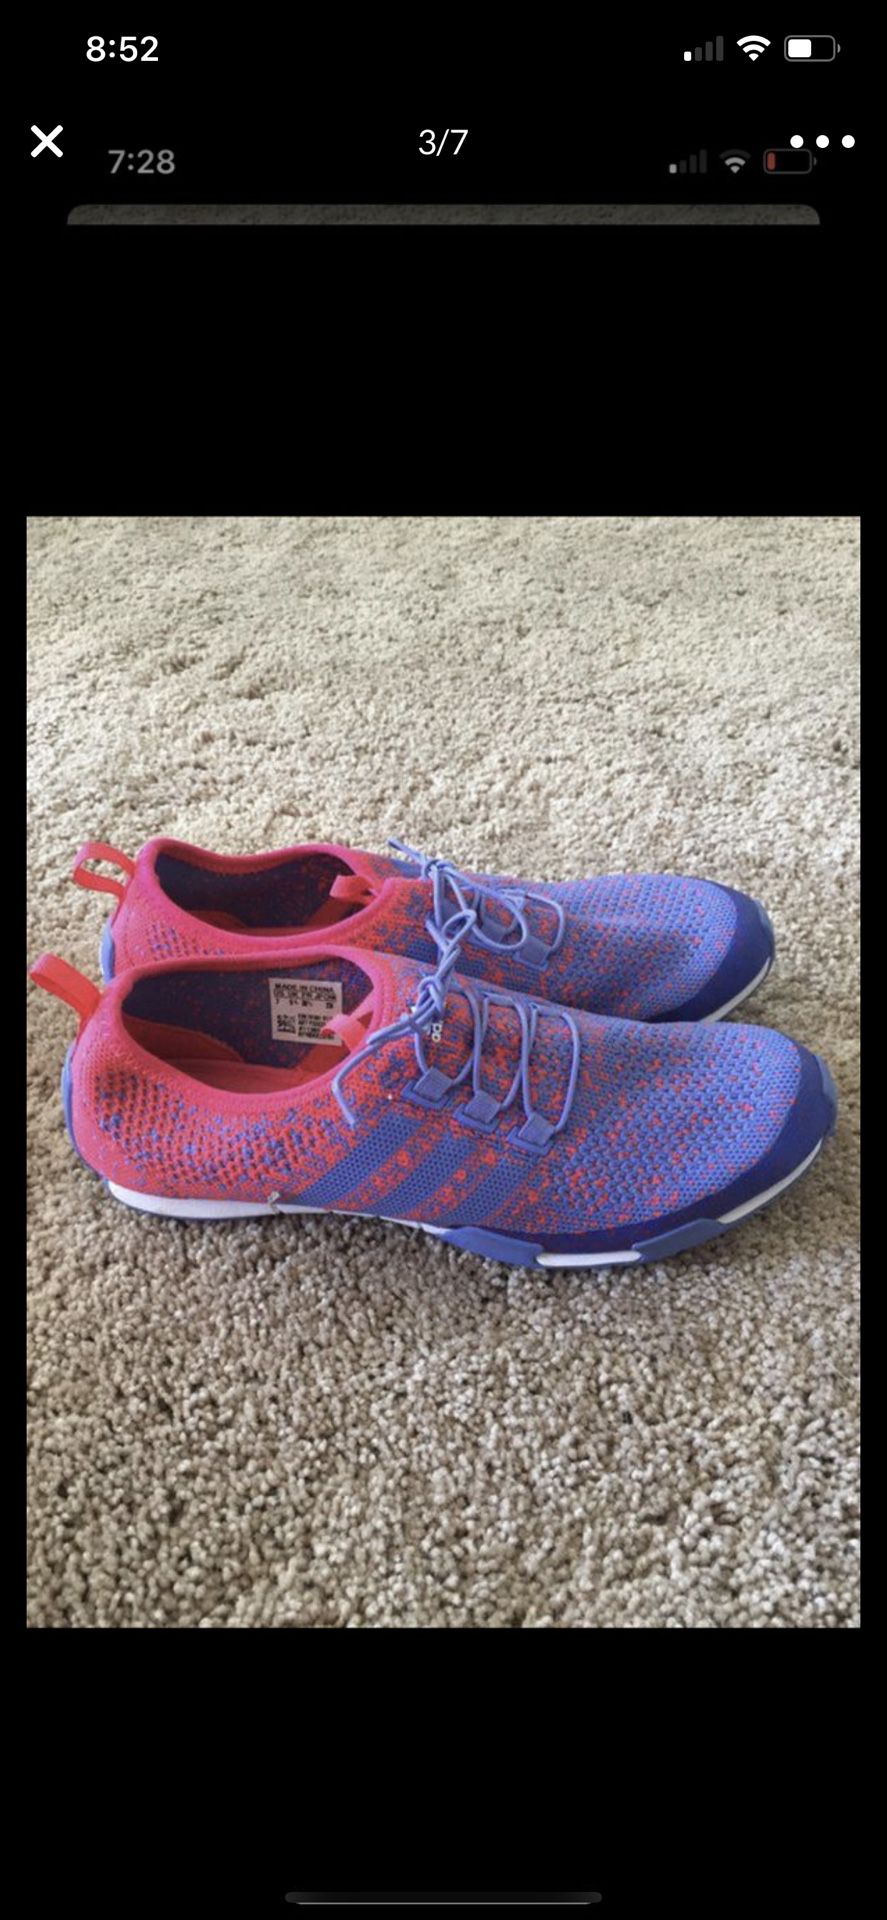 Women’s adidas shoes size 7